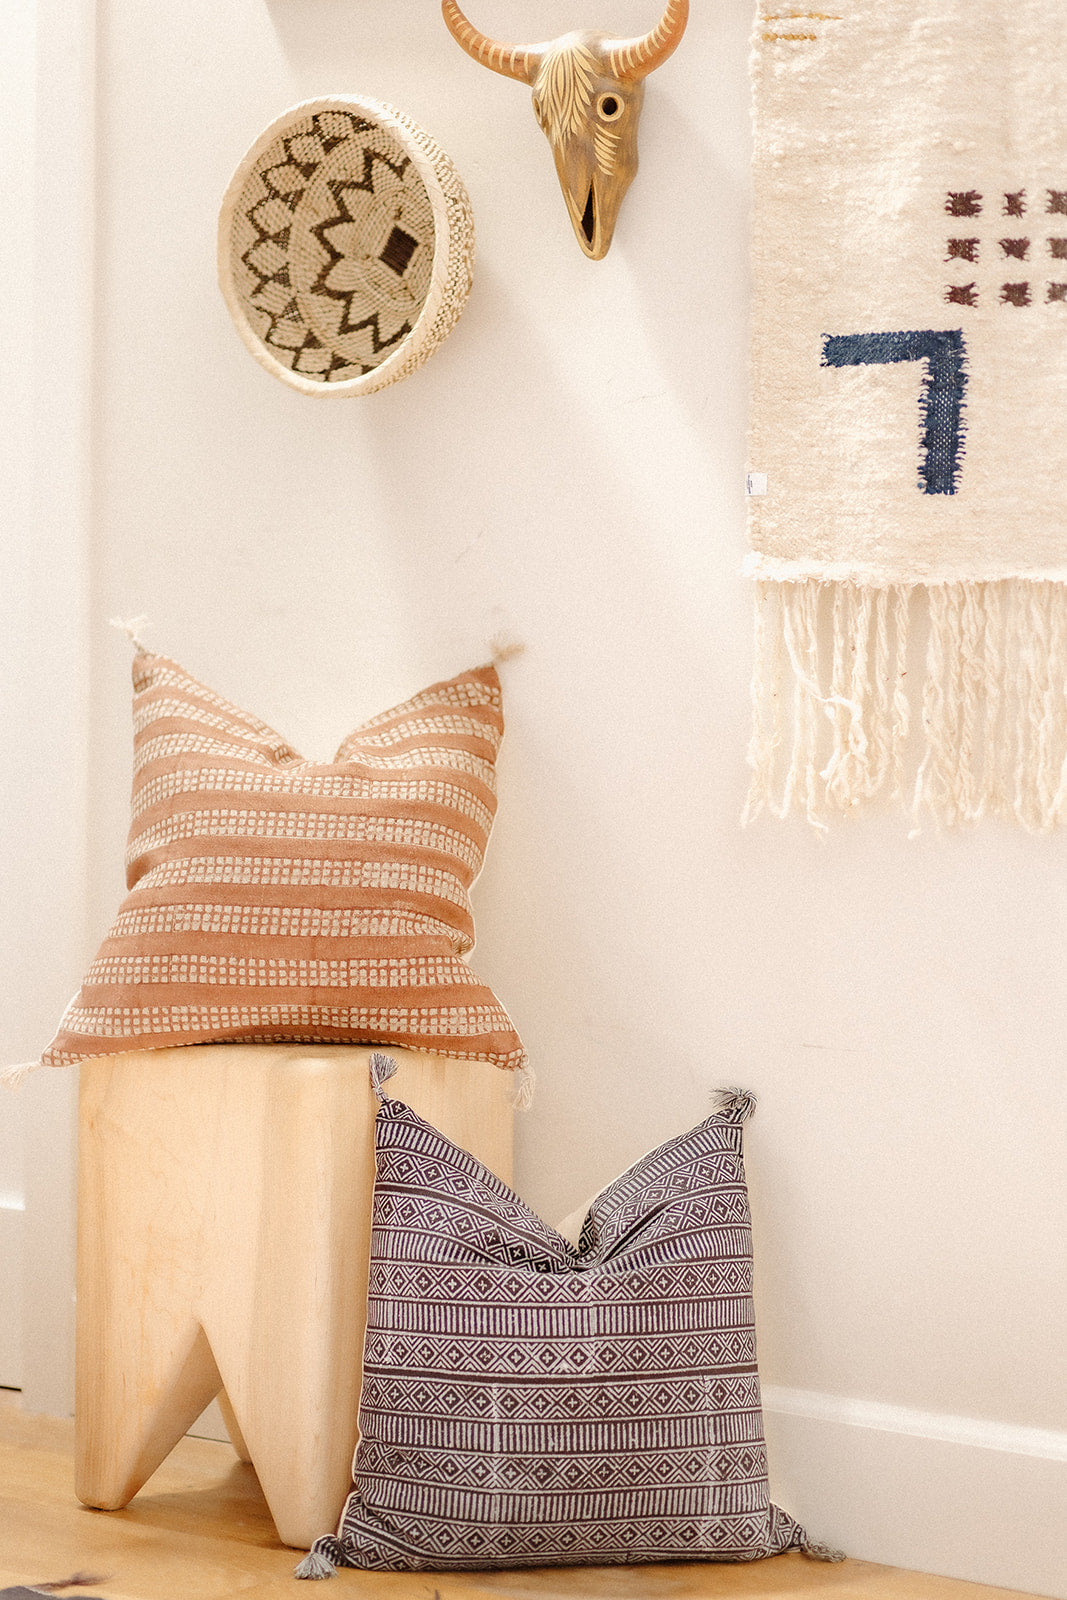 Handmade pillows from India with a handwoven basket from East Africa and an ethically-made wall hanging from Mexico